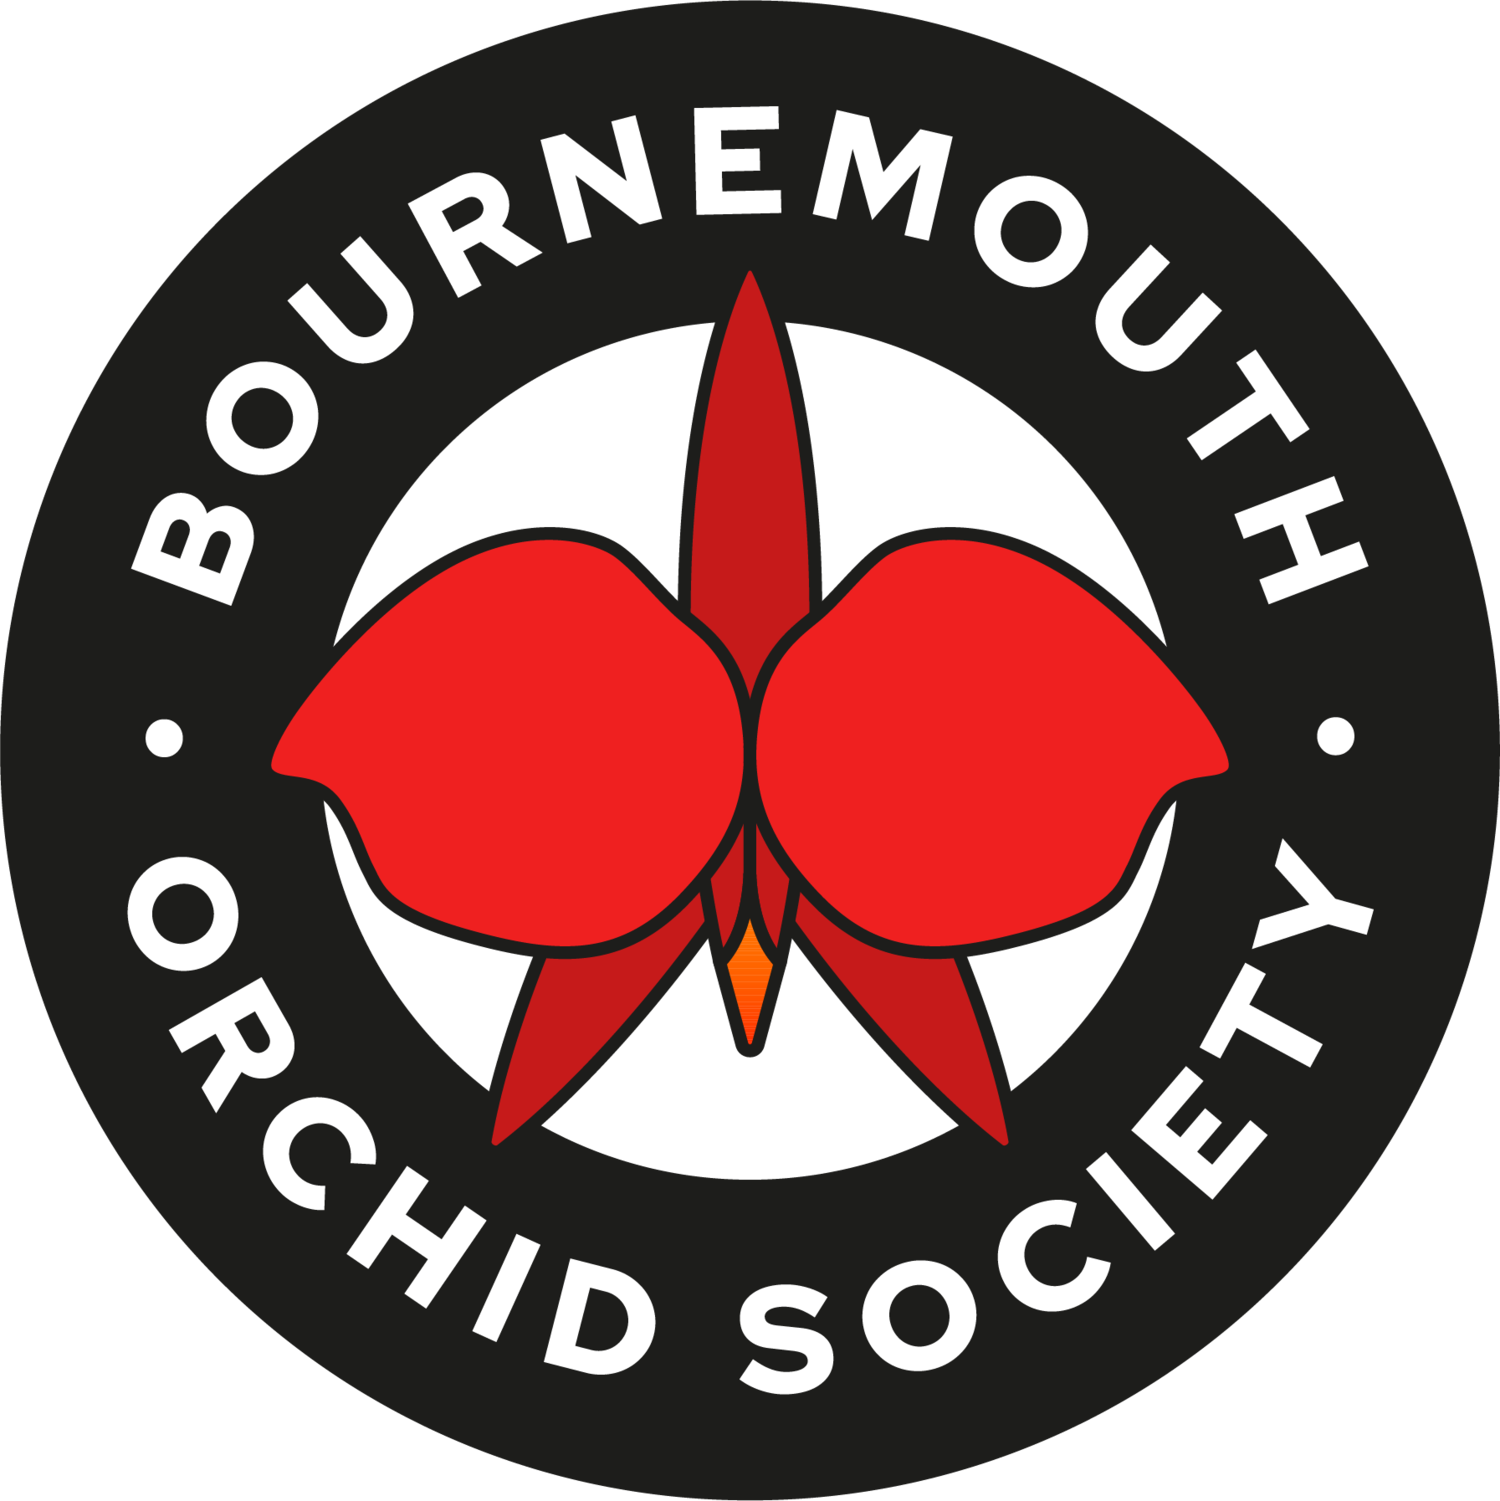 Bournemouth Orchid Society